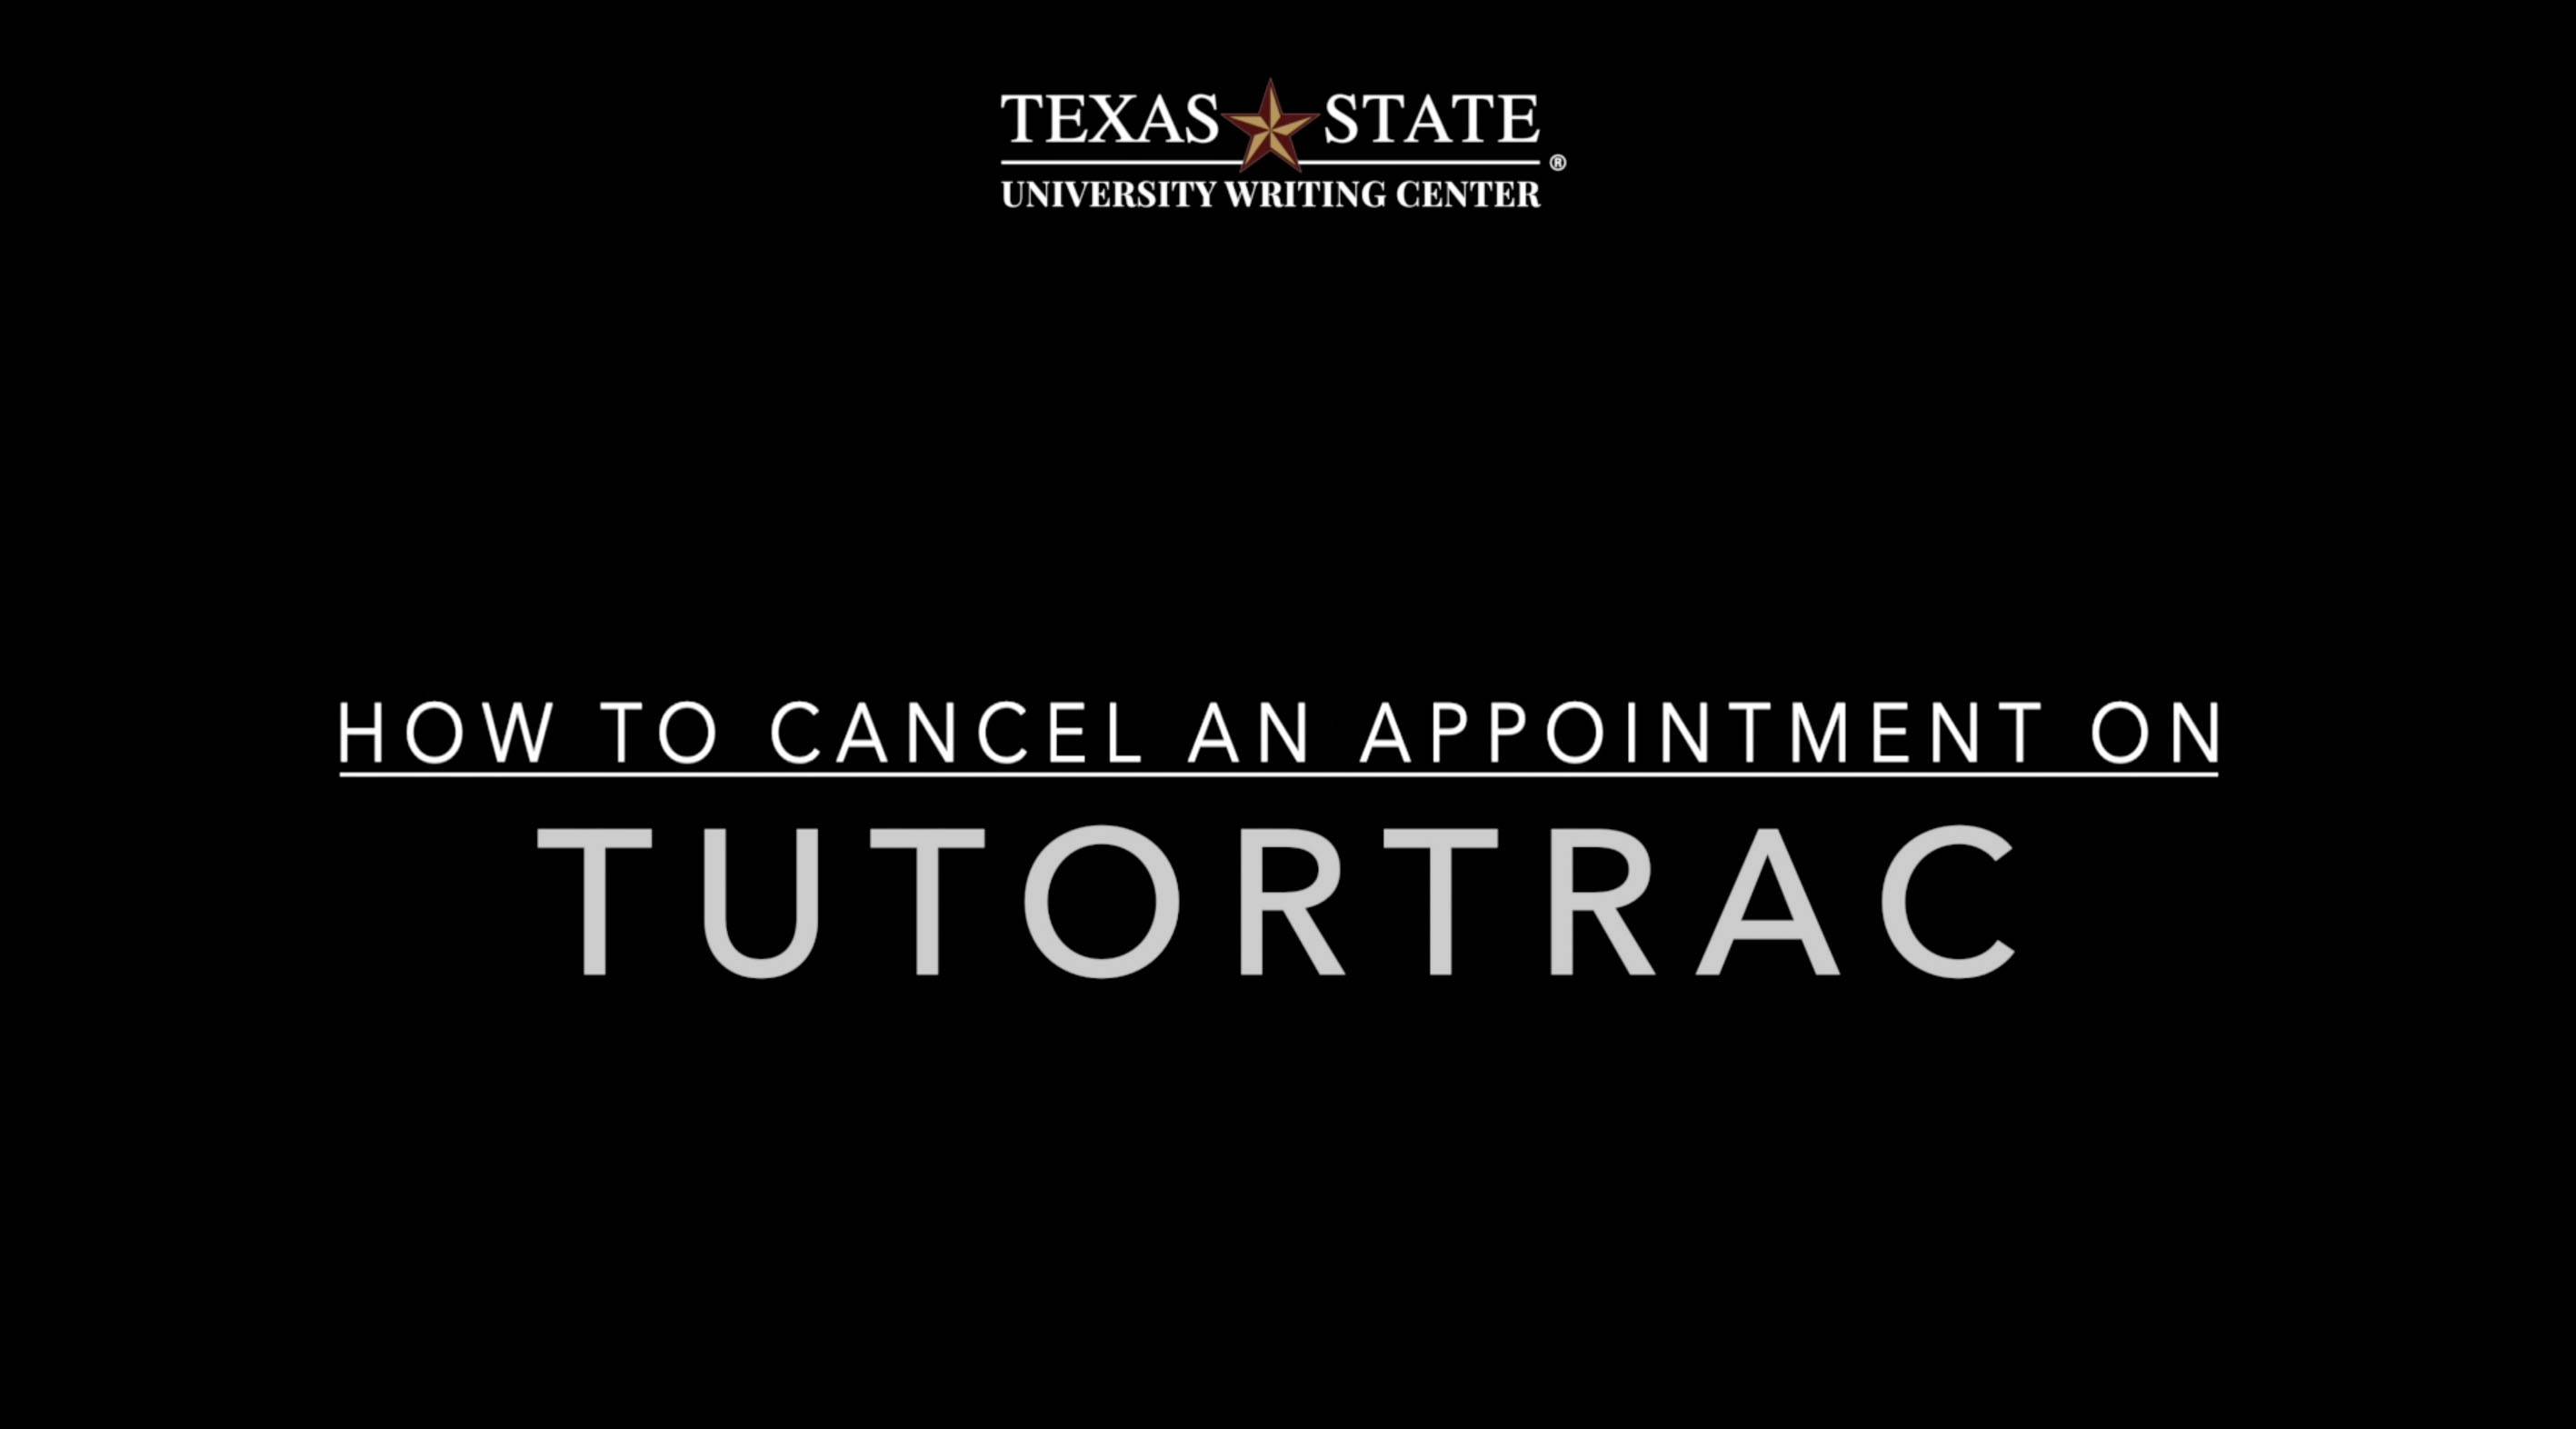 How to Cancel an Appointment